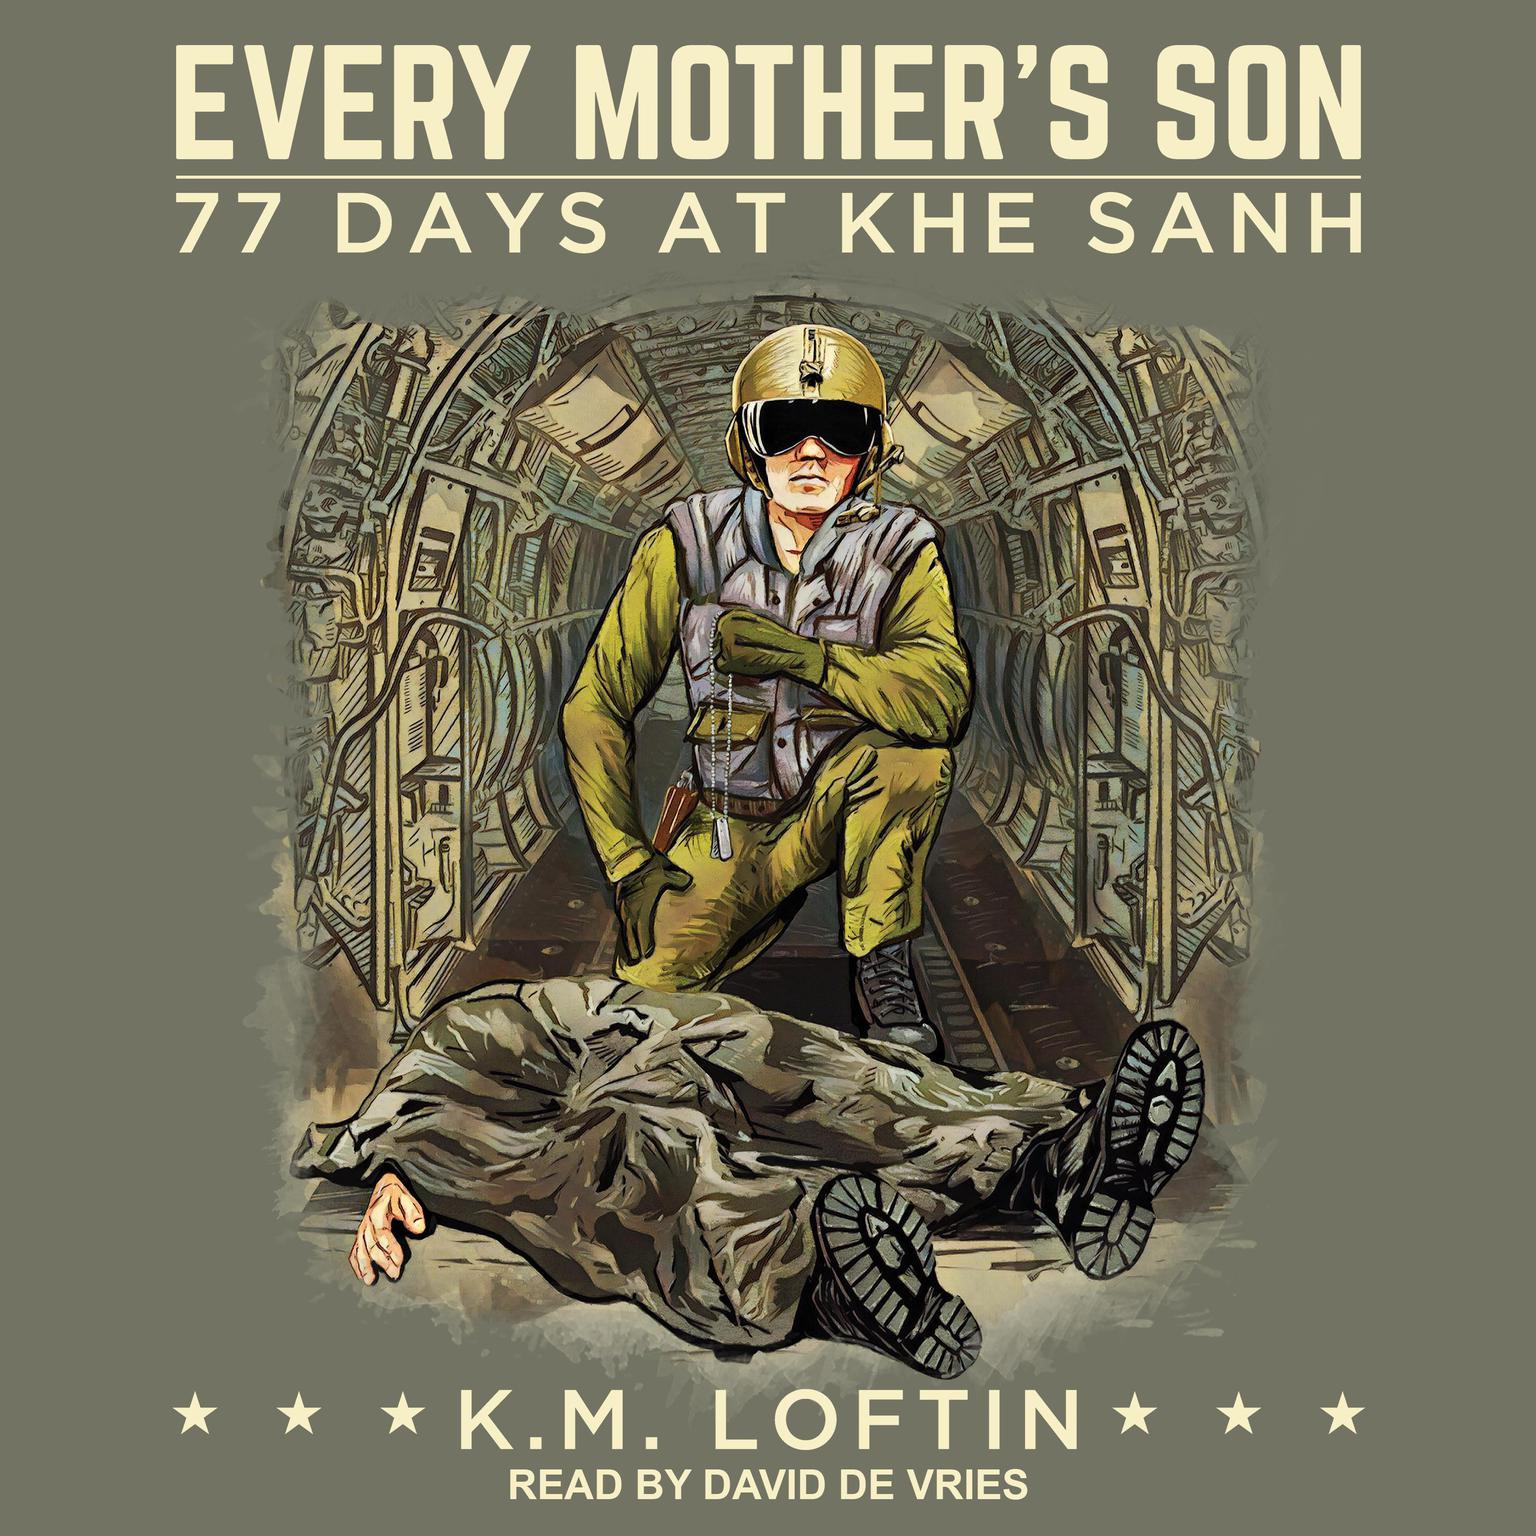 Every Mothers Son: 77 Days at Khe Sanh Audiobook, by K.M. Loftin